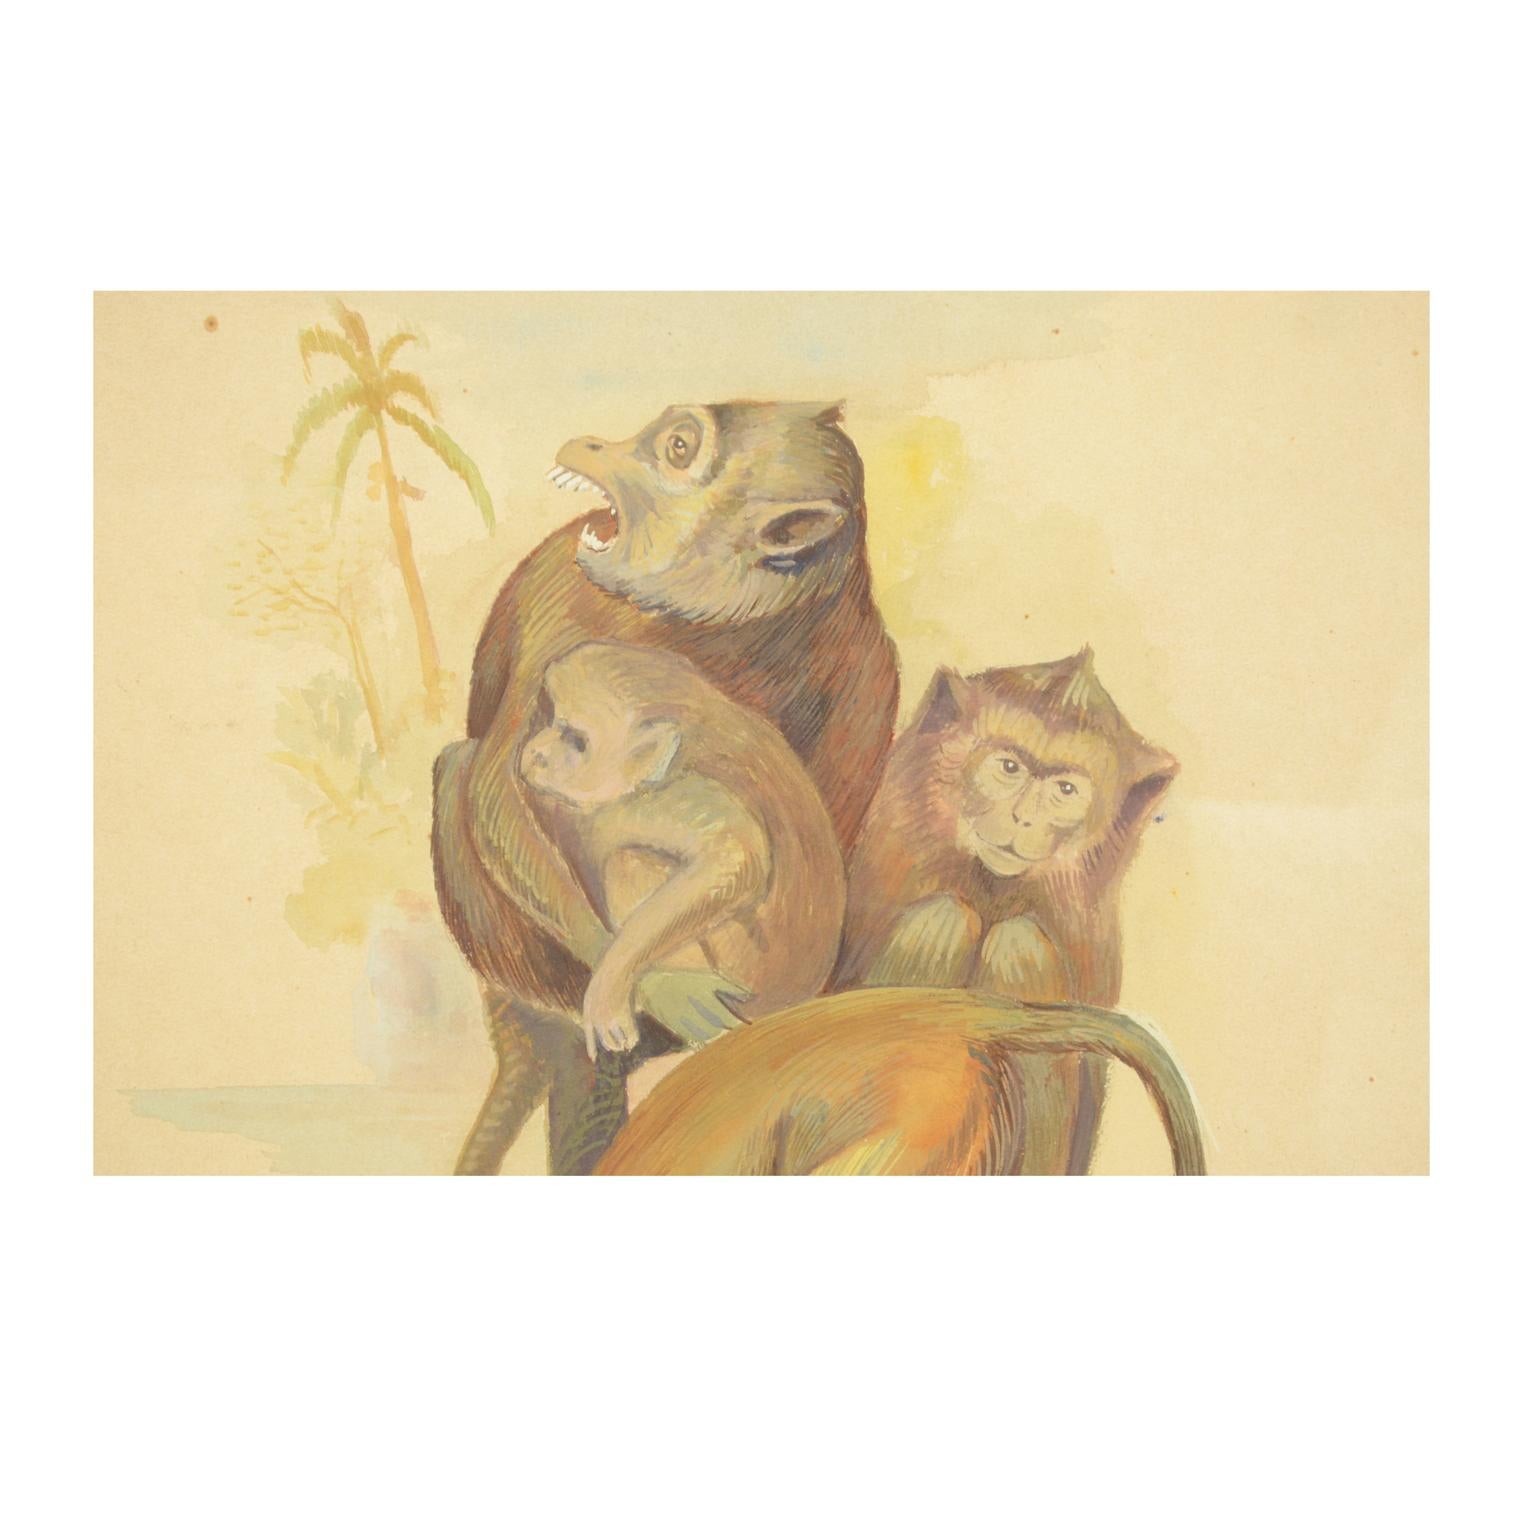 Korean Sketch of Four Macaques Korea 1970s Acrylic on Paper for an Animals Encyclopedia For Sale